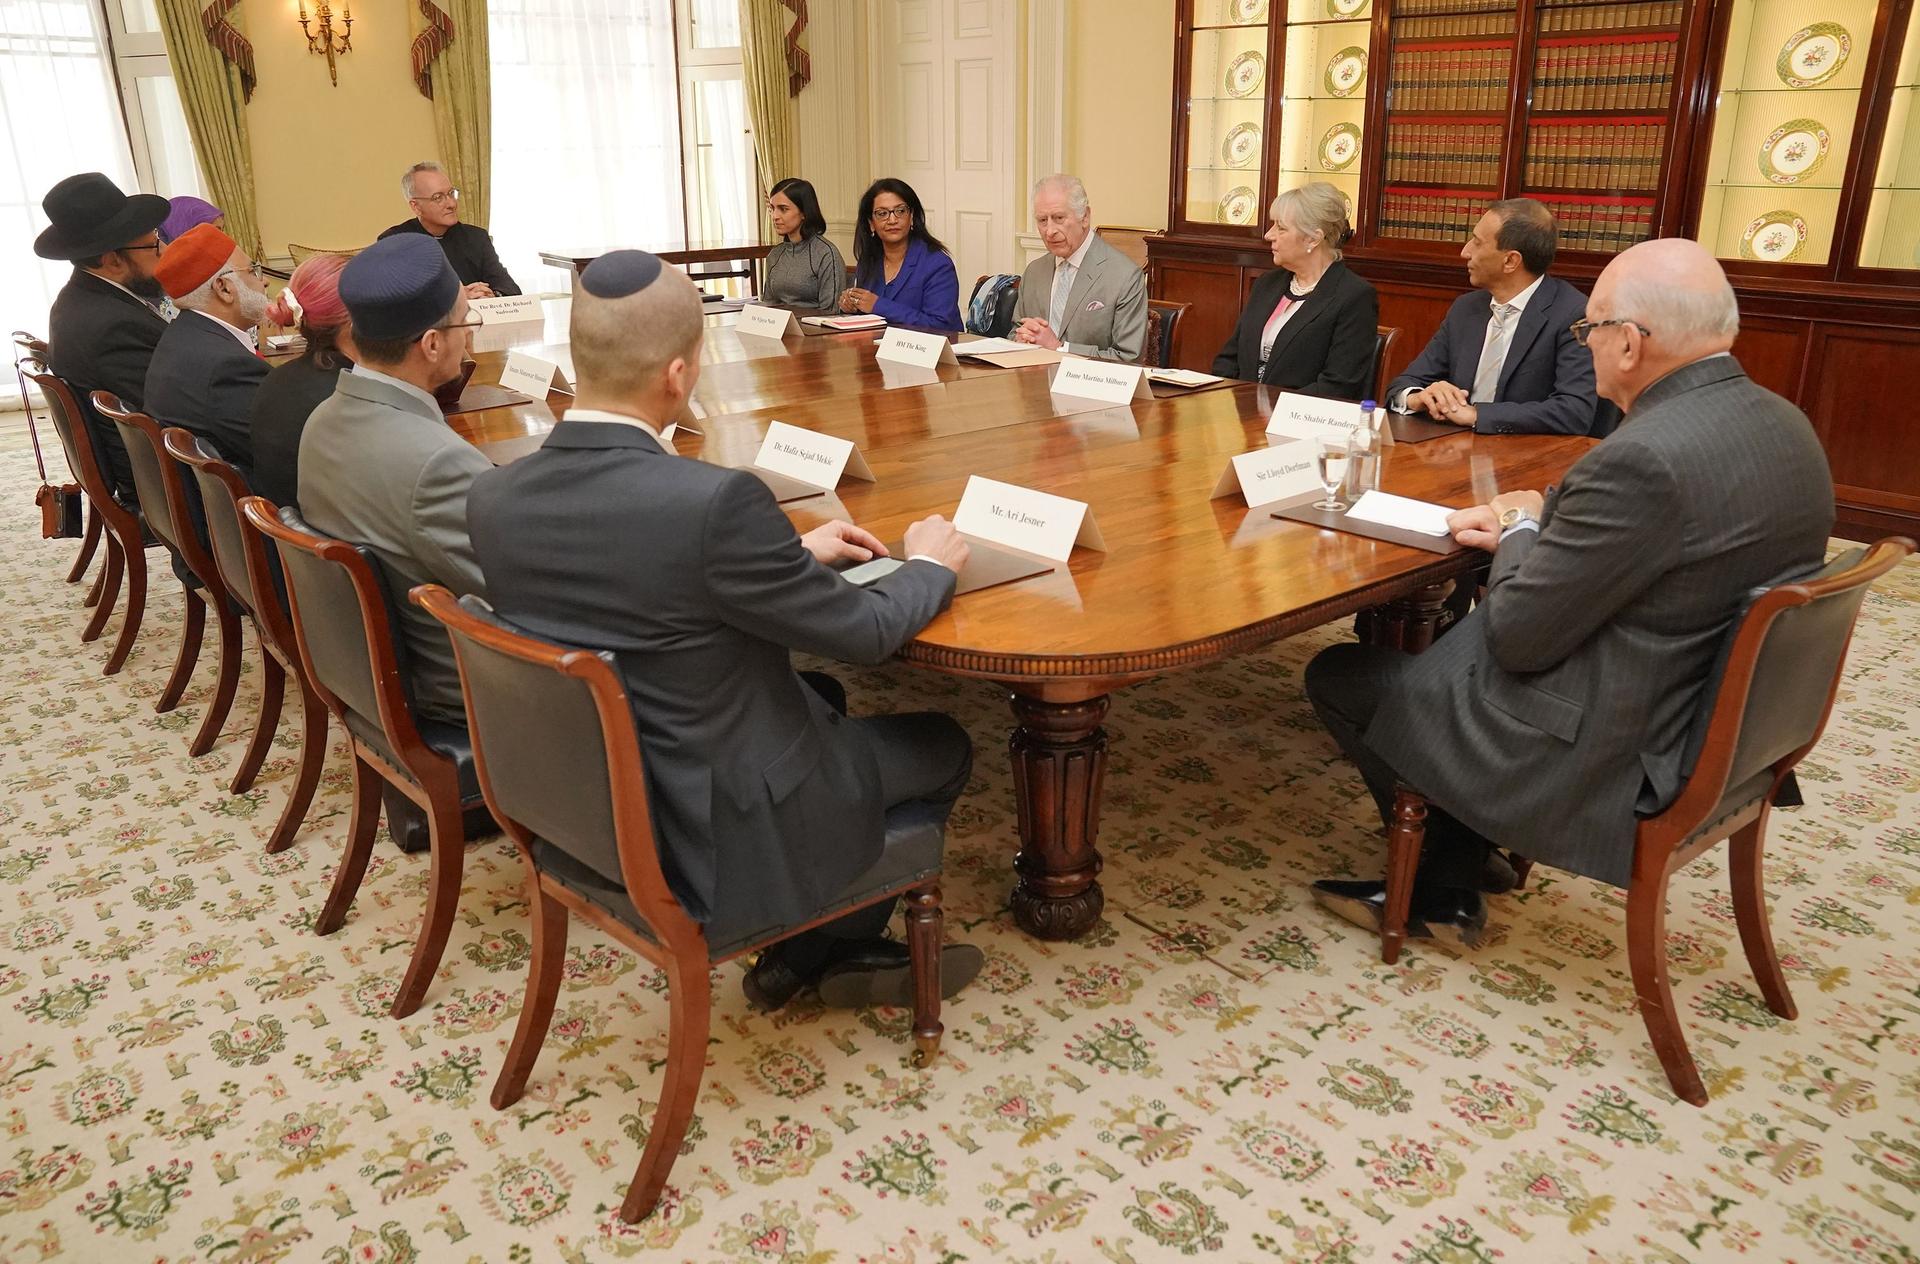 The King speaks with community faith leaders who have taken part in a Windsor Leadership Trust programme, encouraging and supporting dialogue, harmony and understanding at a time of heightened international tension at Buckingham Palace on Tuesday.